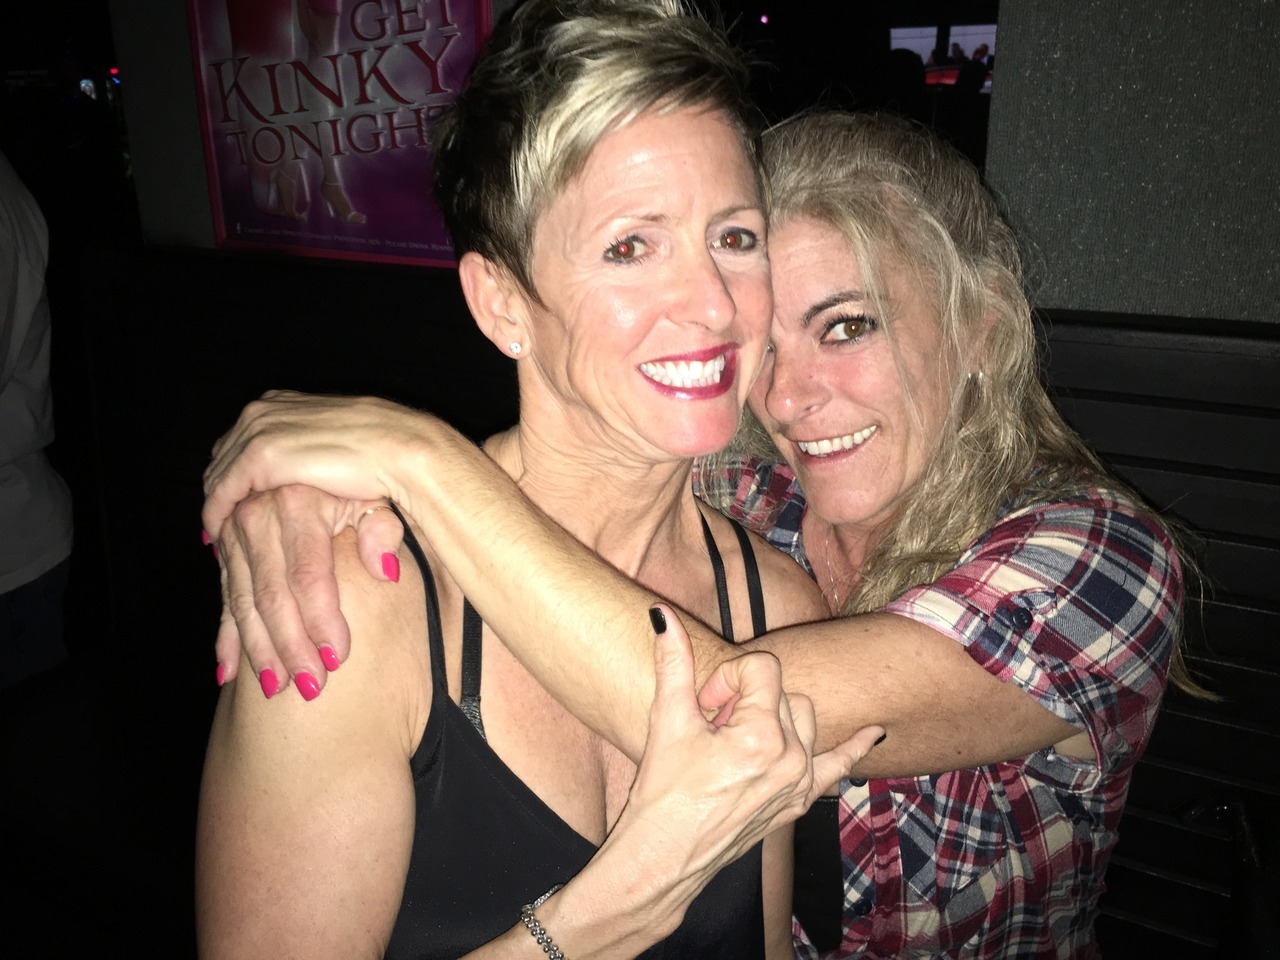 southernfeeling:  Wives are ready to fuck . Posing in front of poster in club, Get